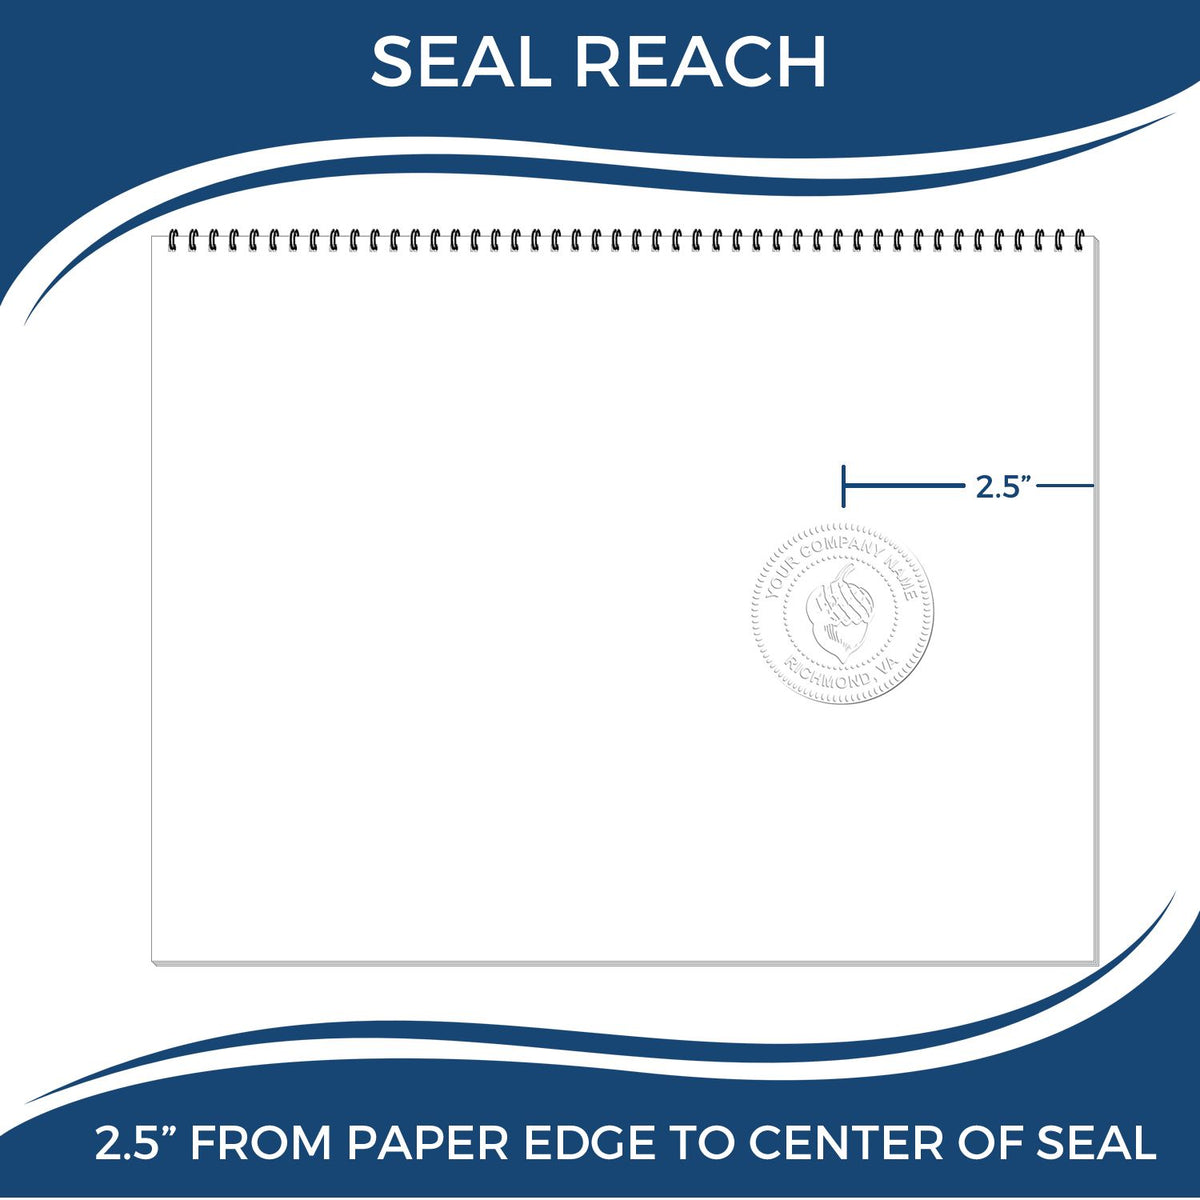 An infographic showing the seal reach which is represented by a ruler and a miniature seal image of the State of Maryland Long Reach Architectural Embossing Seal